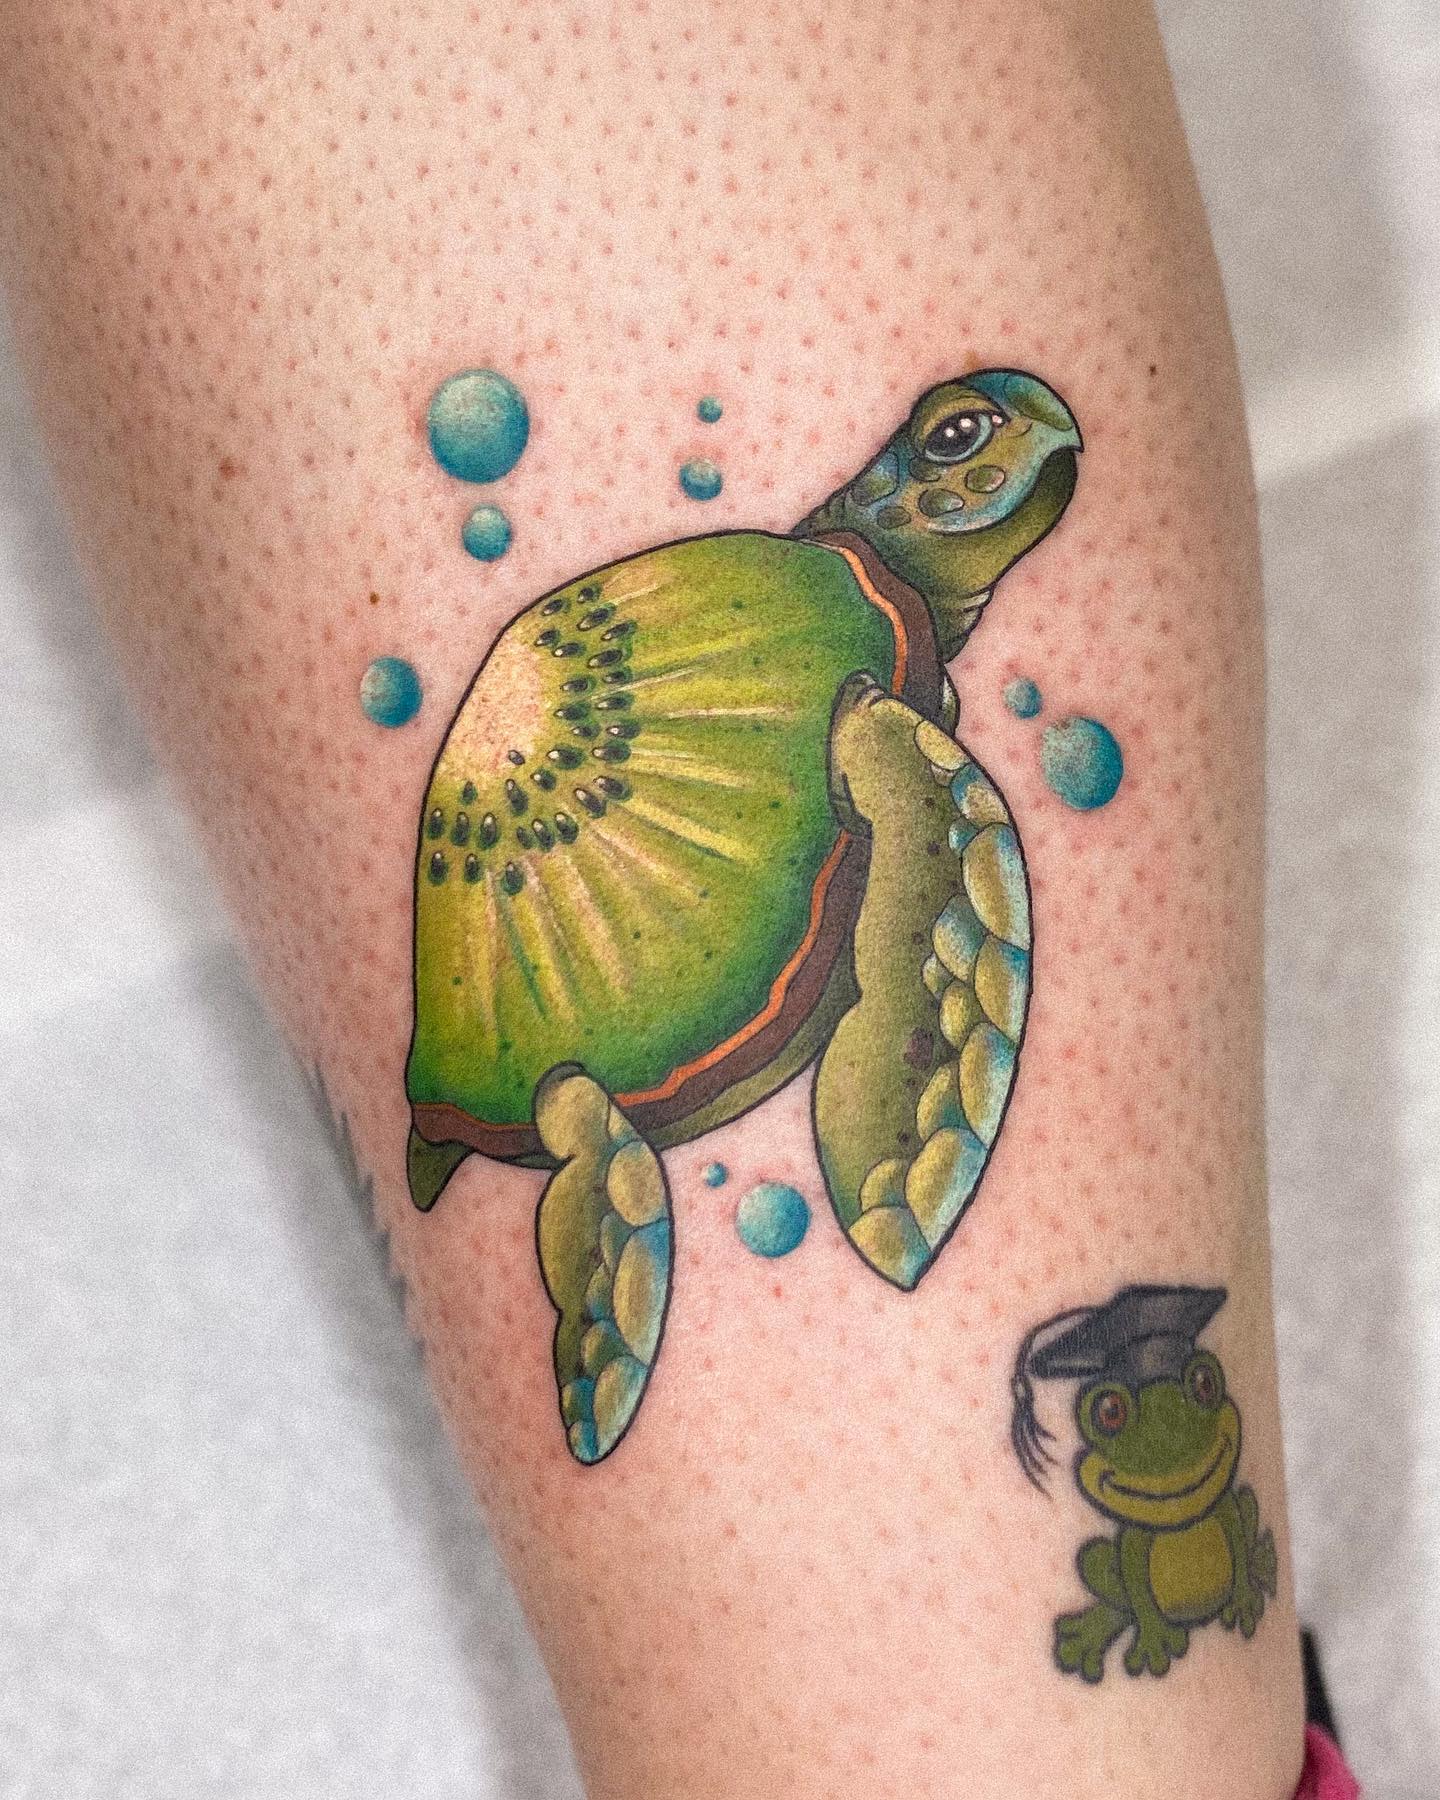 It's cool to see how different people interpret their tattoos differently. In this one, sea turtle's shell is interpreted as a kiwi. If you like creative tattoos, try it out.